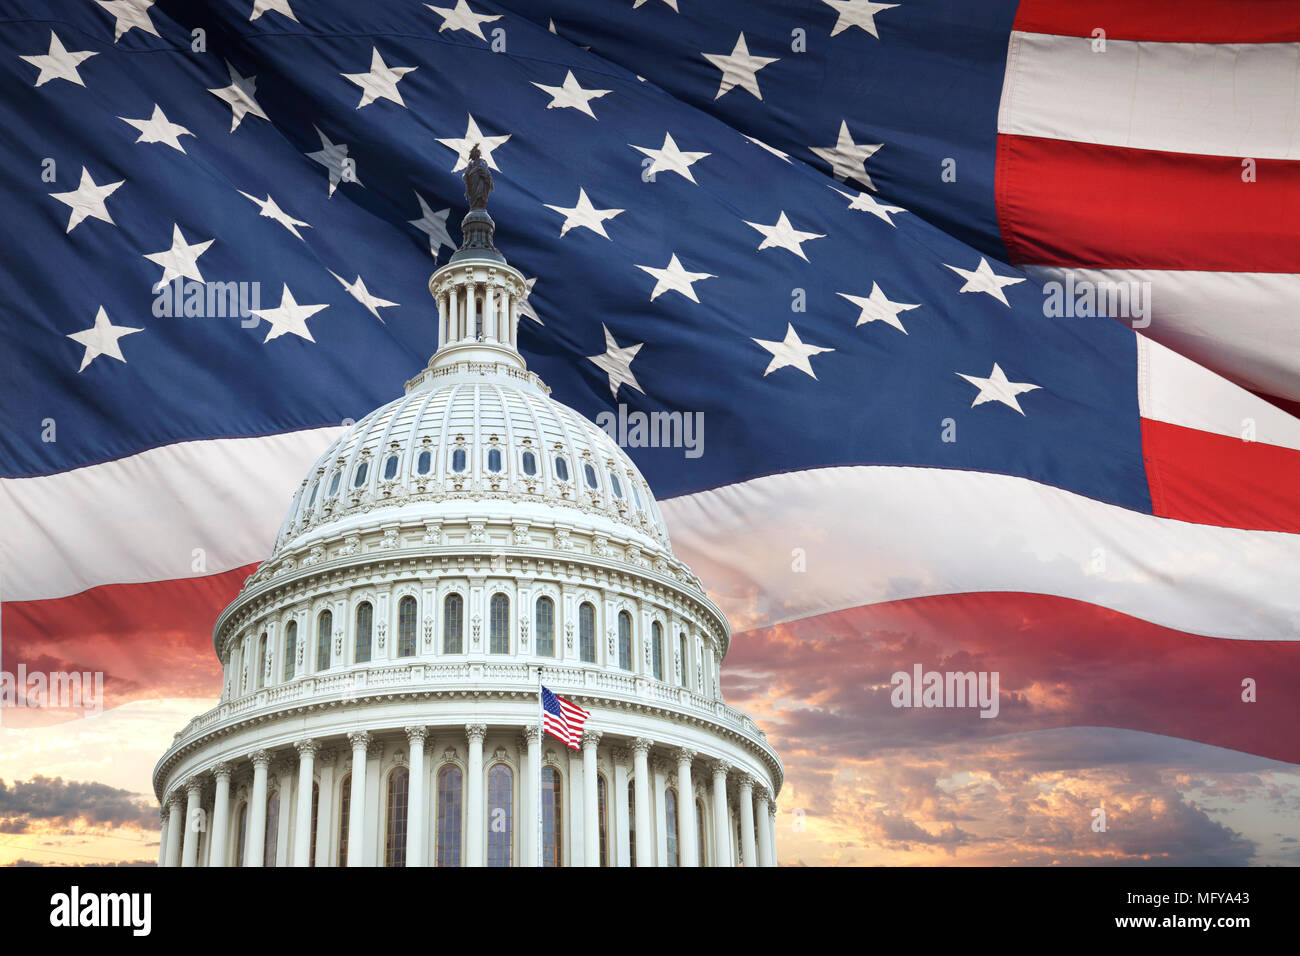 The dome of the United States capitol with an American flag and dramatic clouds behind Stock Photo